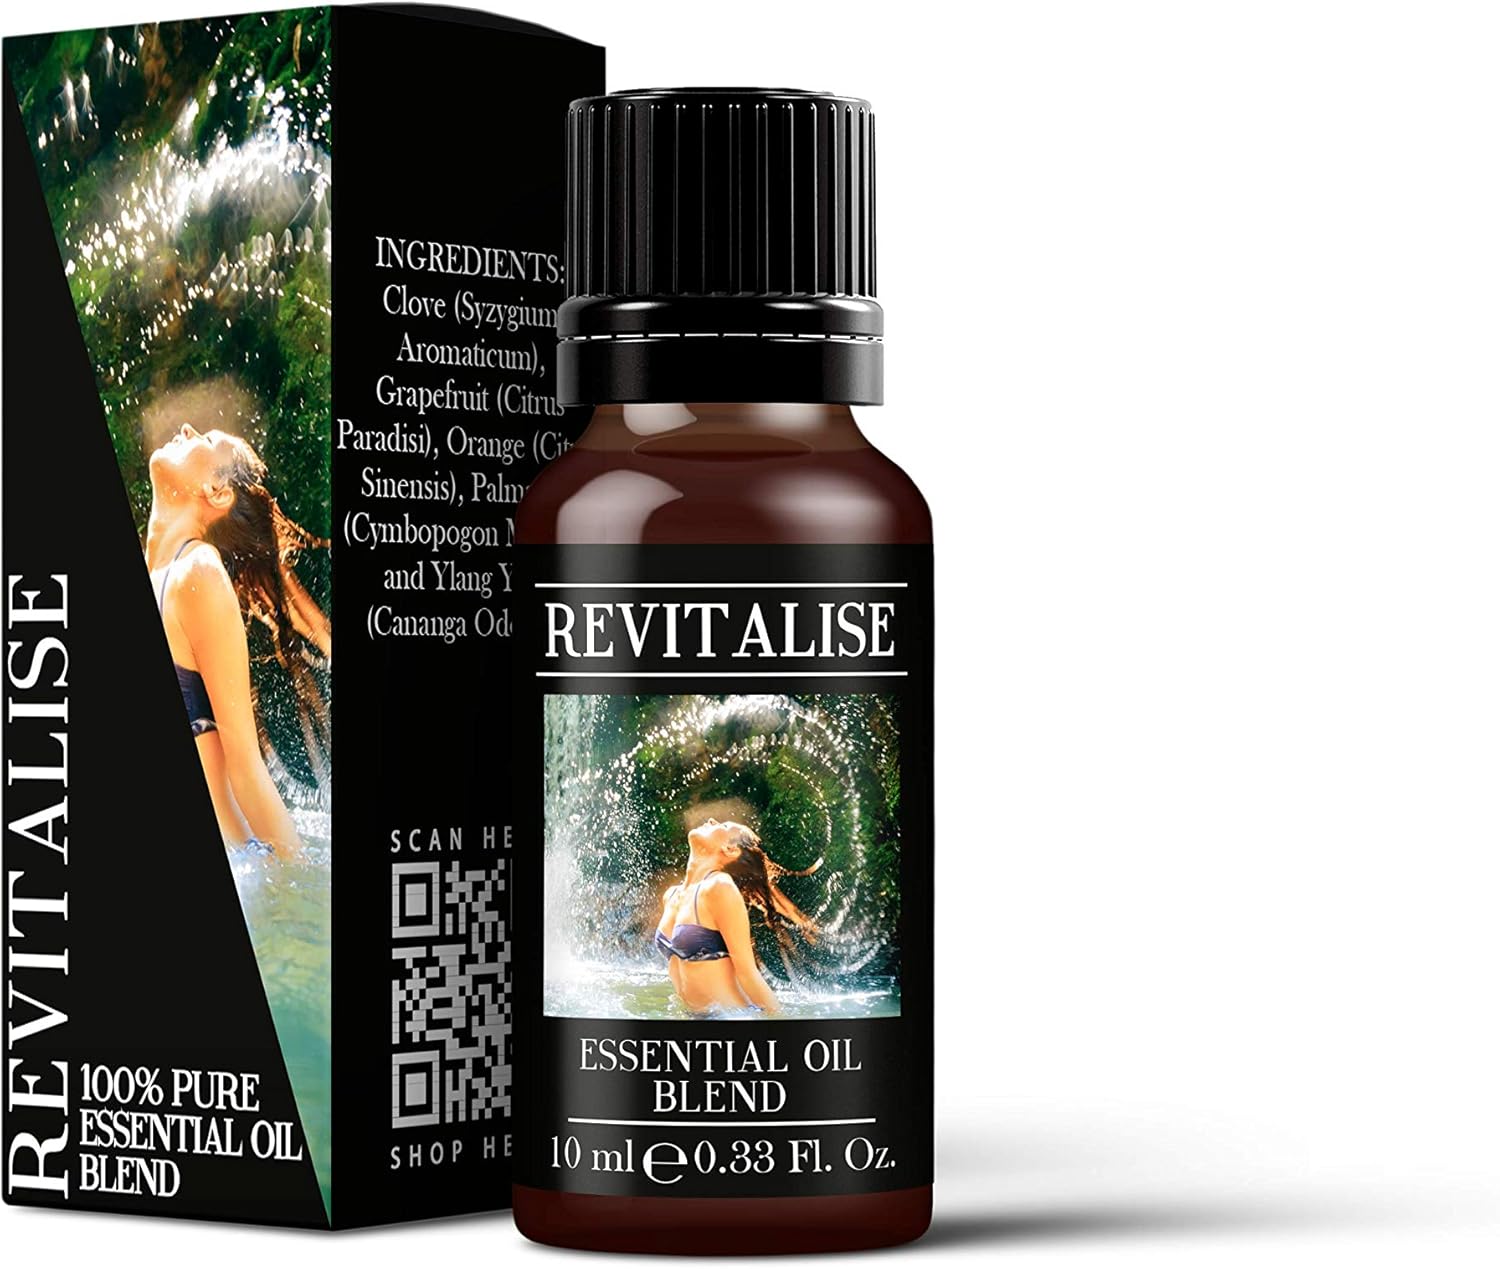 Mystix London | Revitalise Pure & Natural Essential Oil Blend 10ml - for Diffusers, Aromatherapy & Massage Blends | Perfect as a Gift | Vegan, GMO Free